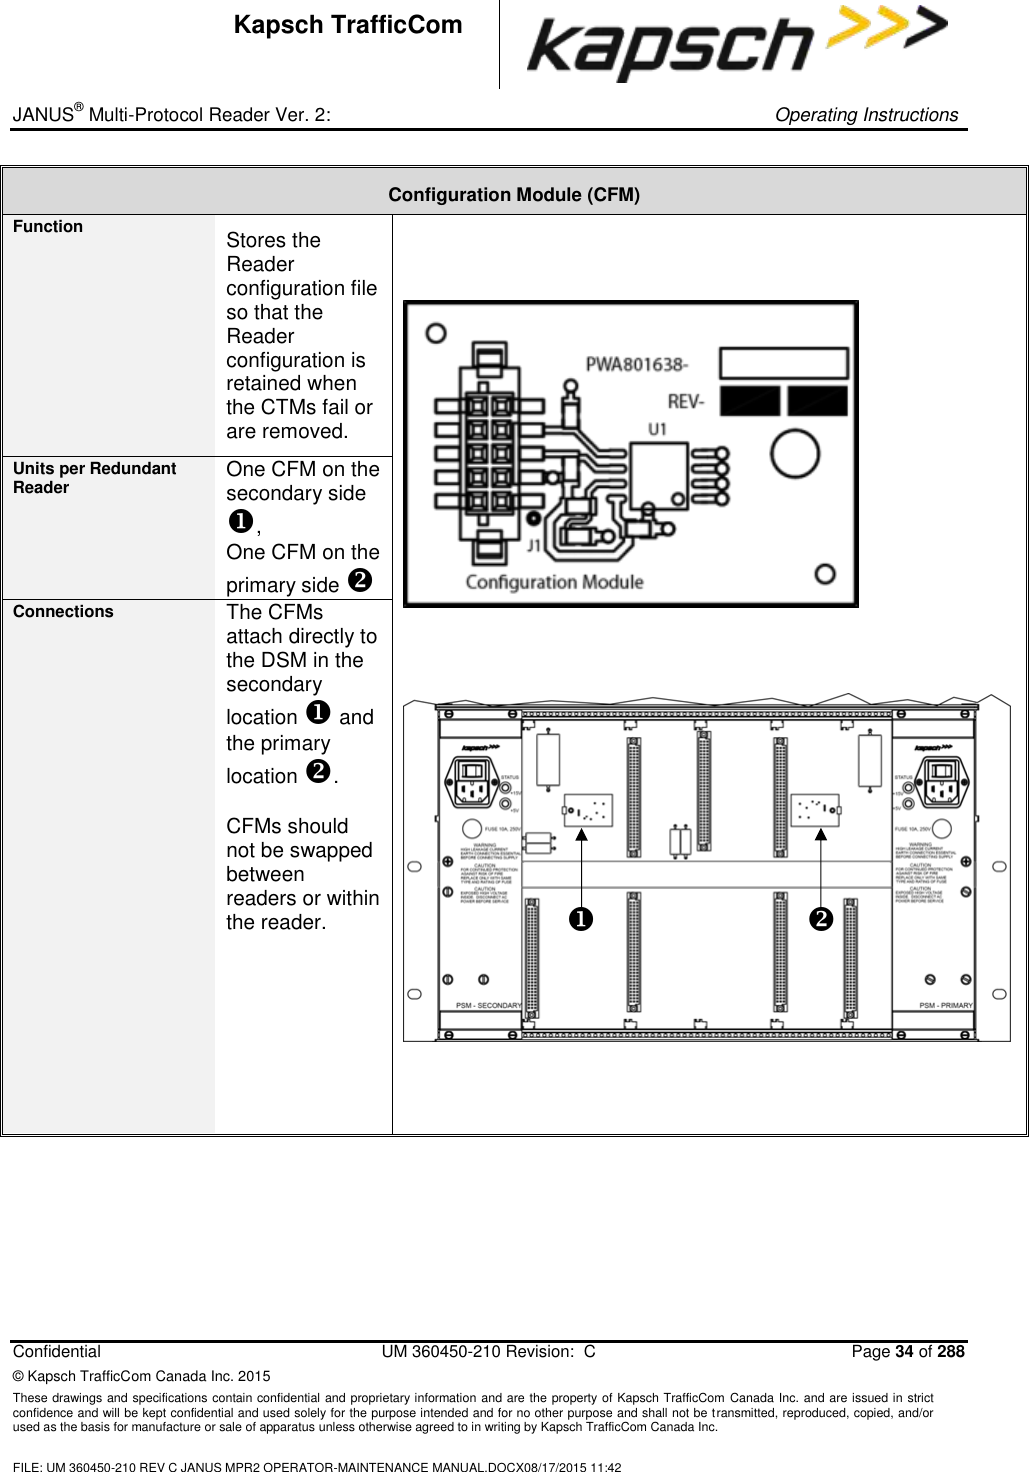 _ JANUS® Multi-Protocol Reader Ver. 2:     Operating Instructions  Confidential  UM 360450-210 Revision:  C  Page 34 of 288 © Kapsch TrafficCom Canada Inc. 2015 These drawings and specifications contain confidential and proprietary information and are the property of Kapsch TrafficCom Canada Inc. and are issued in strict confidence and will be kept confidential and used solely for the purpose intended and for no other purpose and shall not be transmitted, reproduced, copied, and/or used as the basis for manufacture or sale of apparatus unless otherwise agreed to in writing by Kapsch TrafficCom Canada Inc.  FILE: UM 360450-210 REV C JANUS MPR2 OPERATOR-MAINTENANCE MANUAL.DOCX08/17/2015 11:42  Kapsch TrafficCom Configuration Module (CFM) Function Stores the Reader configuration file so that the Reader configuration is retained when the CTMs fail or are removed.        Units per Redundant Reader One CFM on the secondary side , One CFM on the primary side  Connections The CFMs attach directly to the DSM in the secondary location  and the primary location .  CFMs should not be swapped between readers or within the reader.       